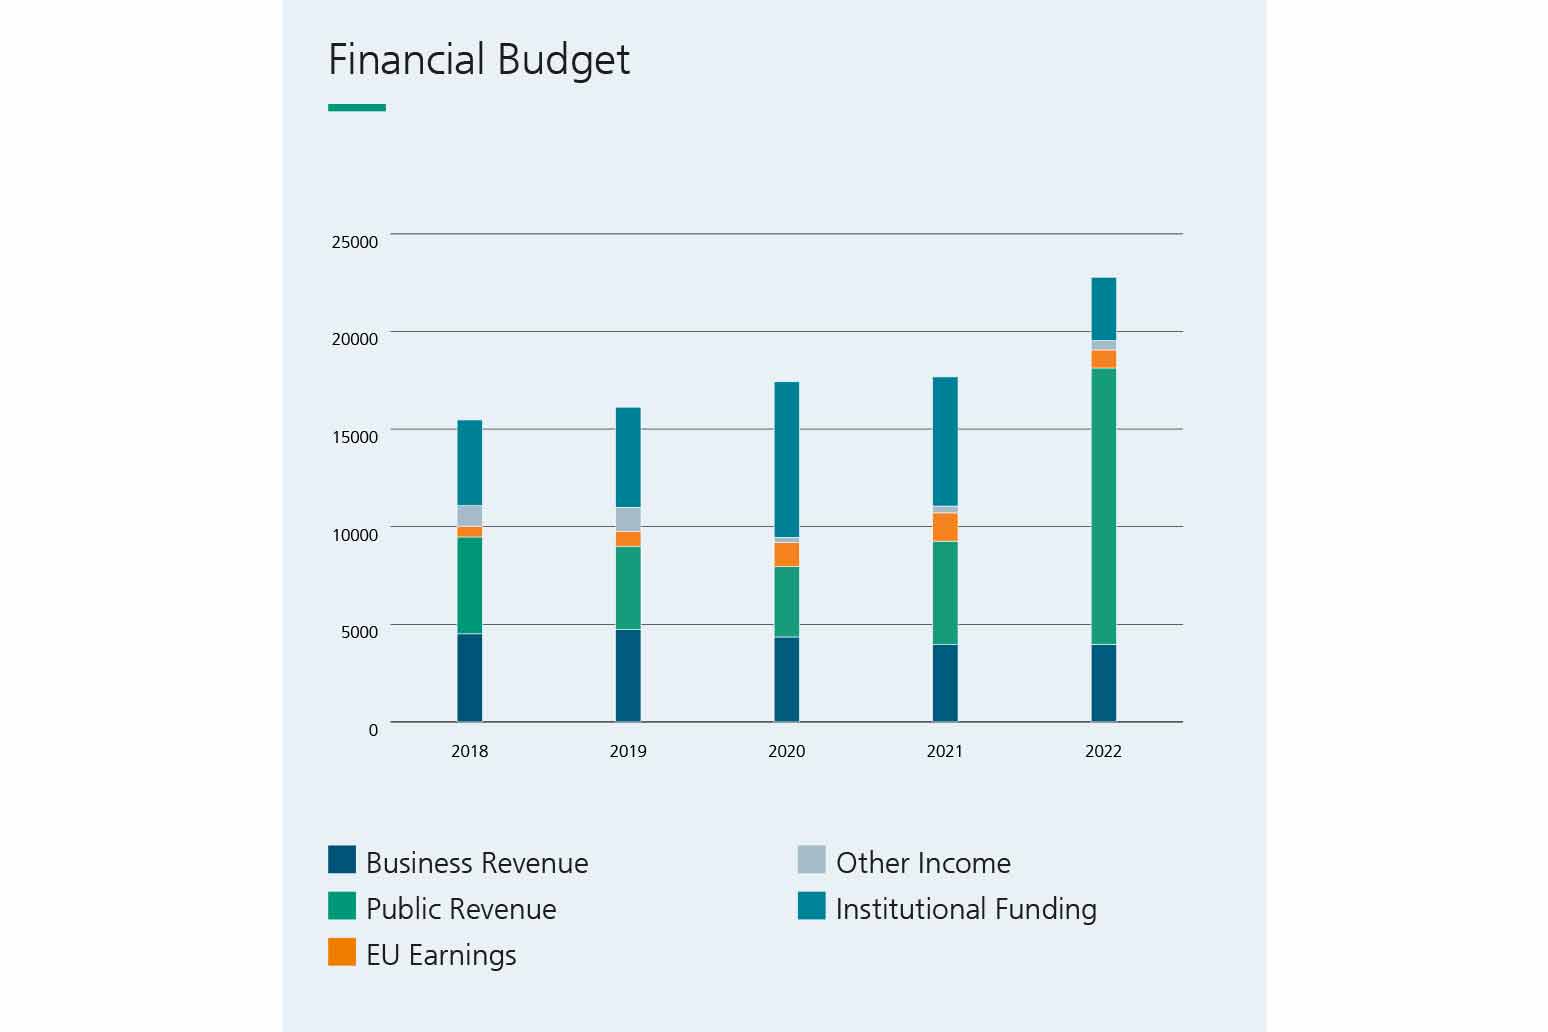 Development of the overall budget within the last five years